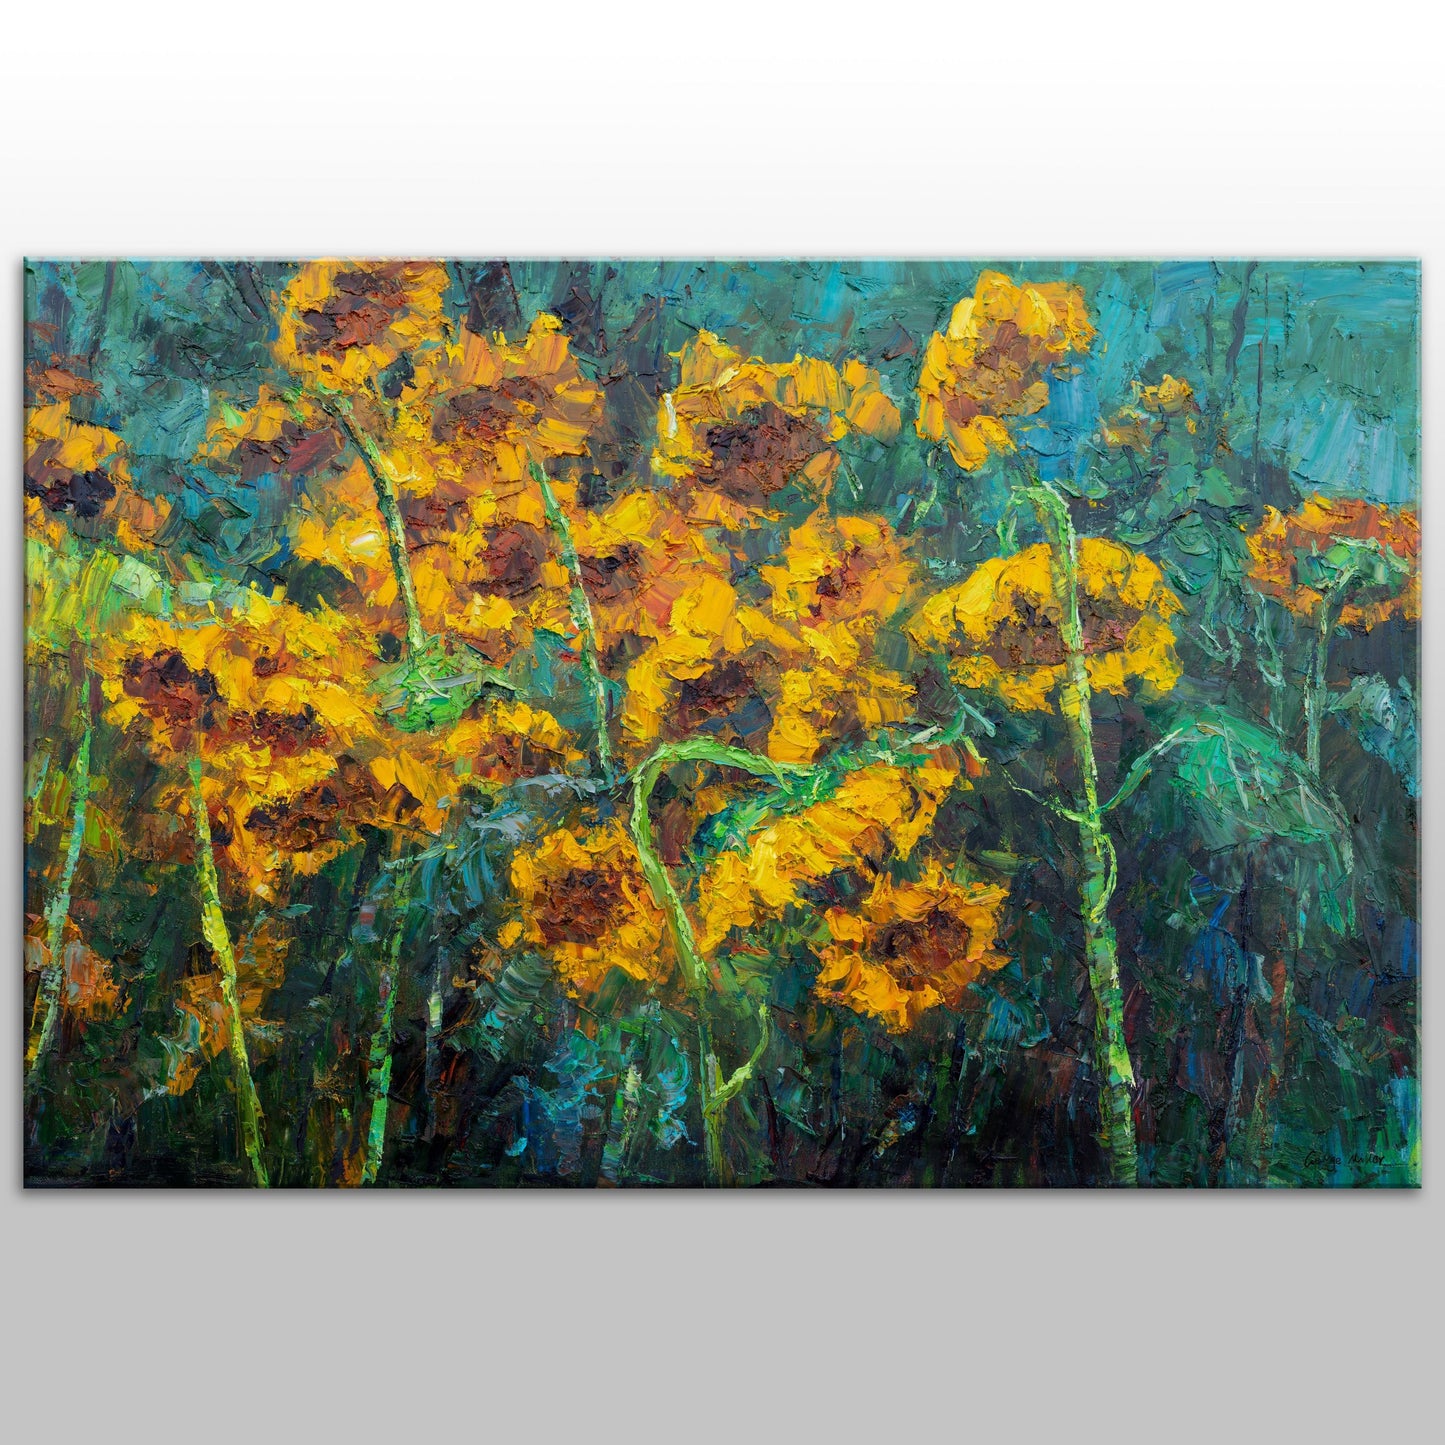 Oil Painting Blooming Sunflowers, Large Floral Oil Painting, Abstract Wall Art, Oil Painting Original, Floral Art, Contemporary Art, Yellow